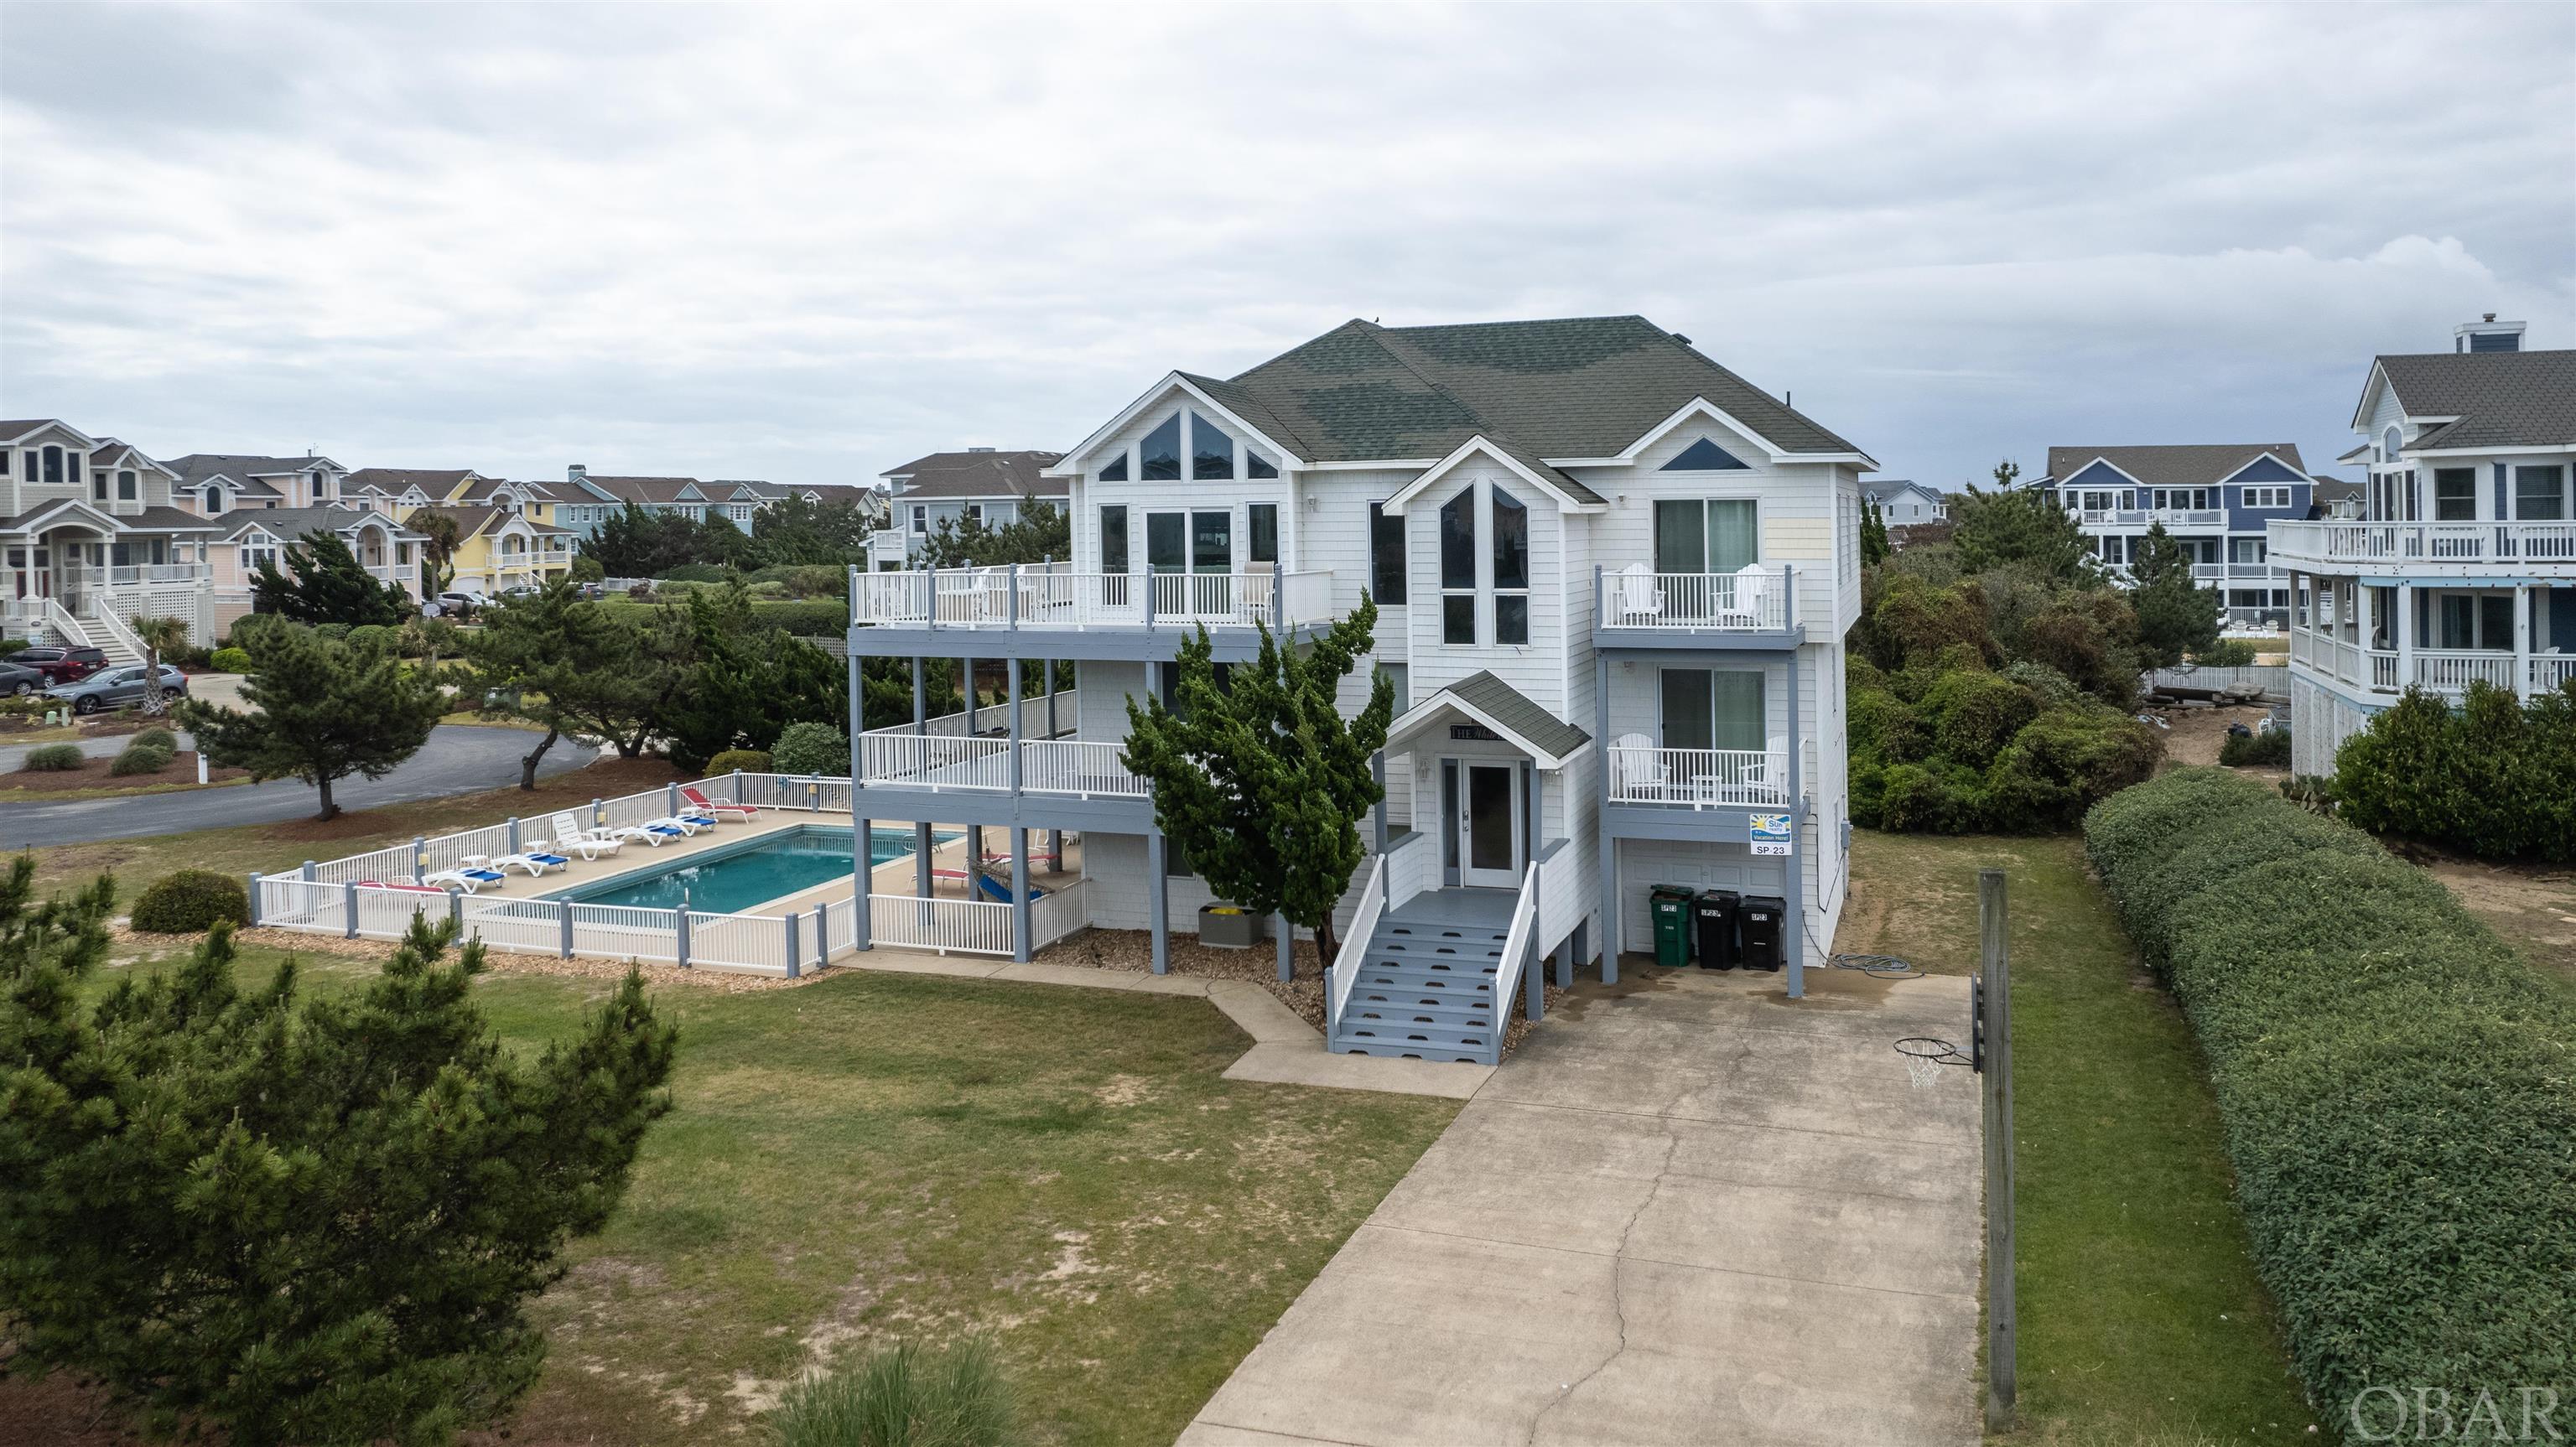 Spectacular opportunity for this semi-oceanfront home in Duck!  The home features a great layout with plenty of space for your family to spread out and enjoy all that the beach has to offer.  Expansive decking, awesome pool area, great ground floor game room, open and spacious top floor for family gatherings and meal time.  The bedrooms are good sized.  Right in the heart of Duck on arguably the best street in town, you can walk right over to the beach for the day or down to the shopping and restaurants.  You can't beat this great opportunity!